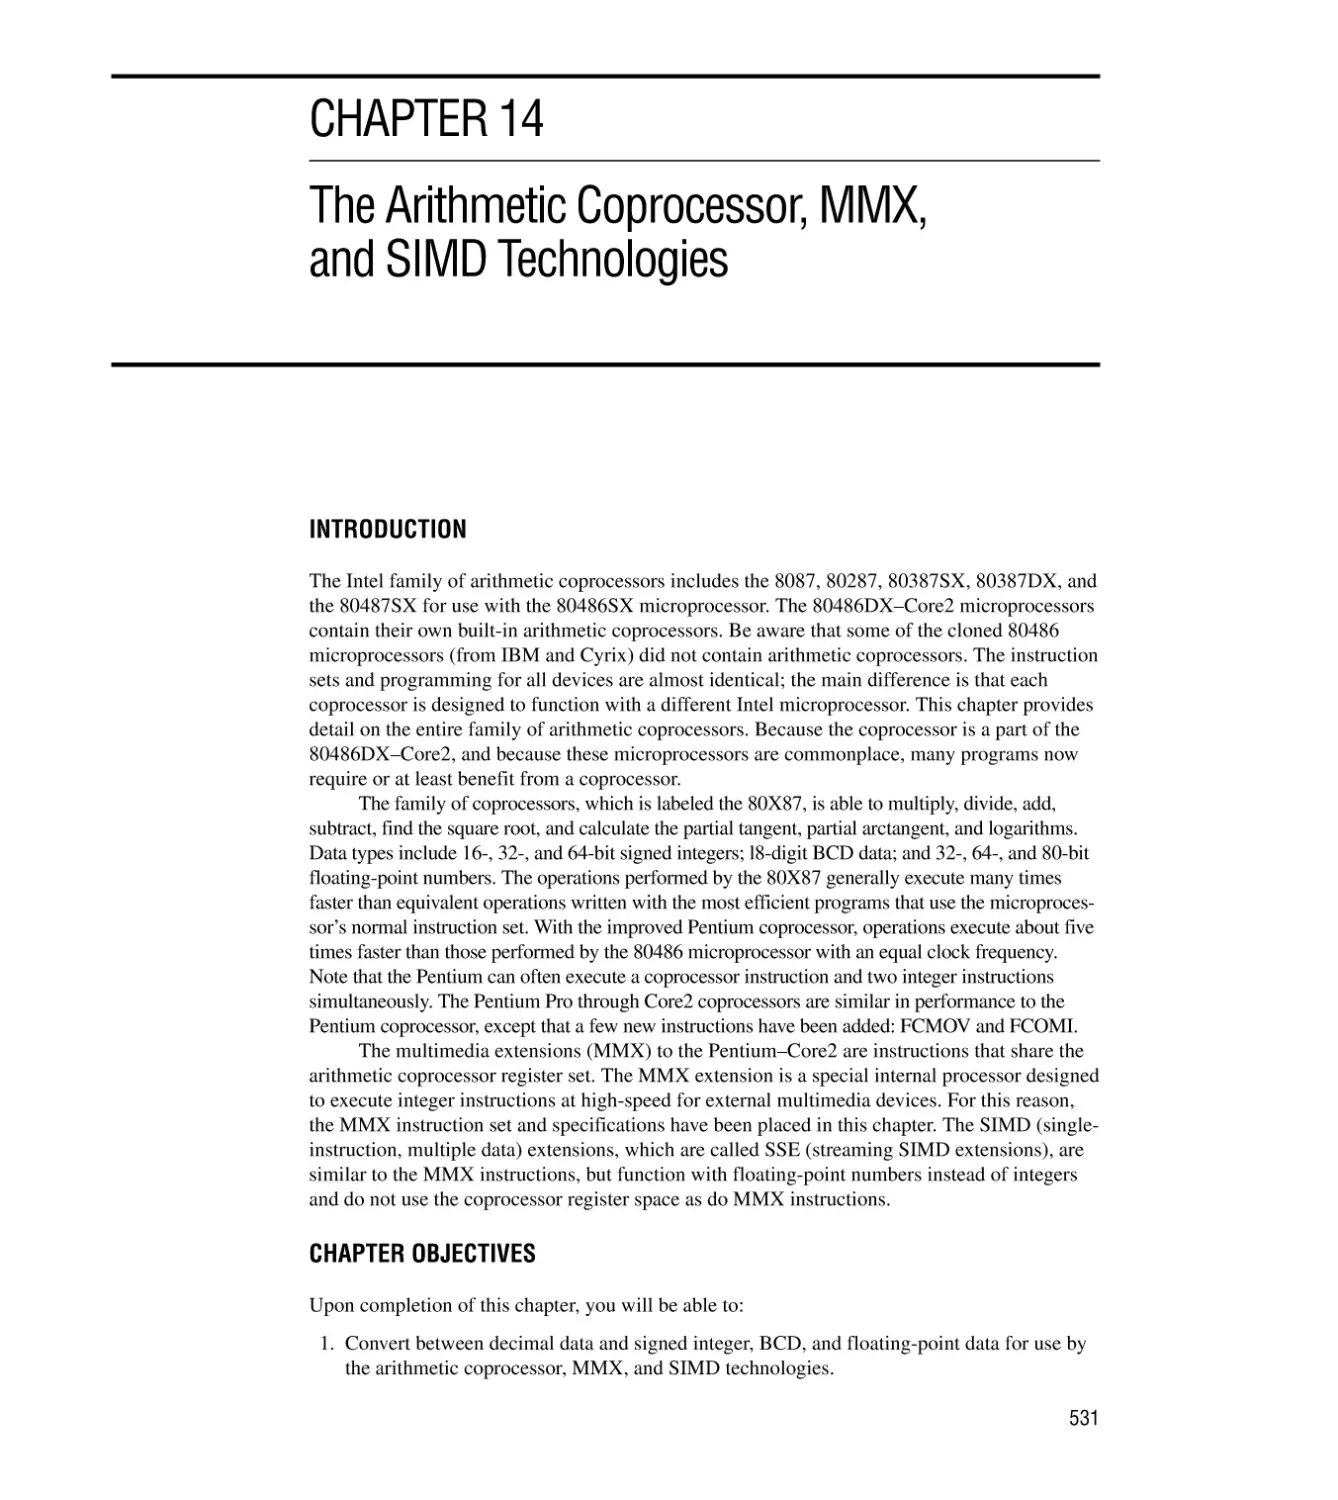 CHAPTER 14 THE ARITHMETIC COPROCESSOR, MMX, AND SIMD TECHNOLOGIES
Introduction/Chapter Objectives